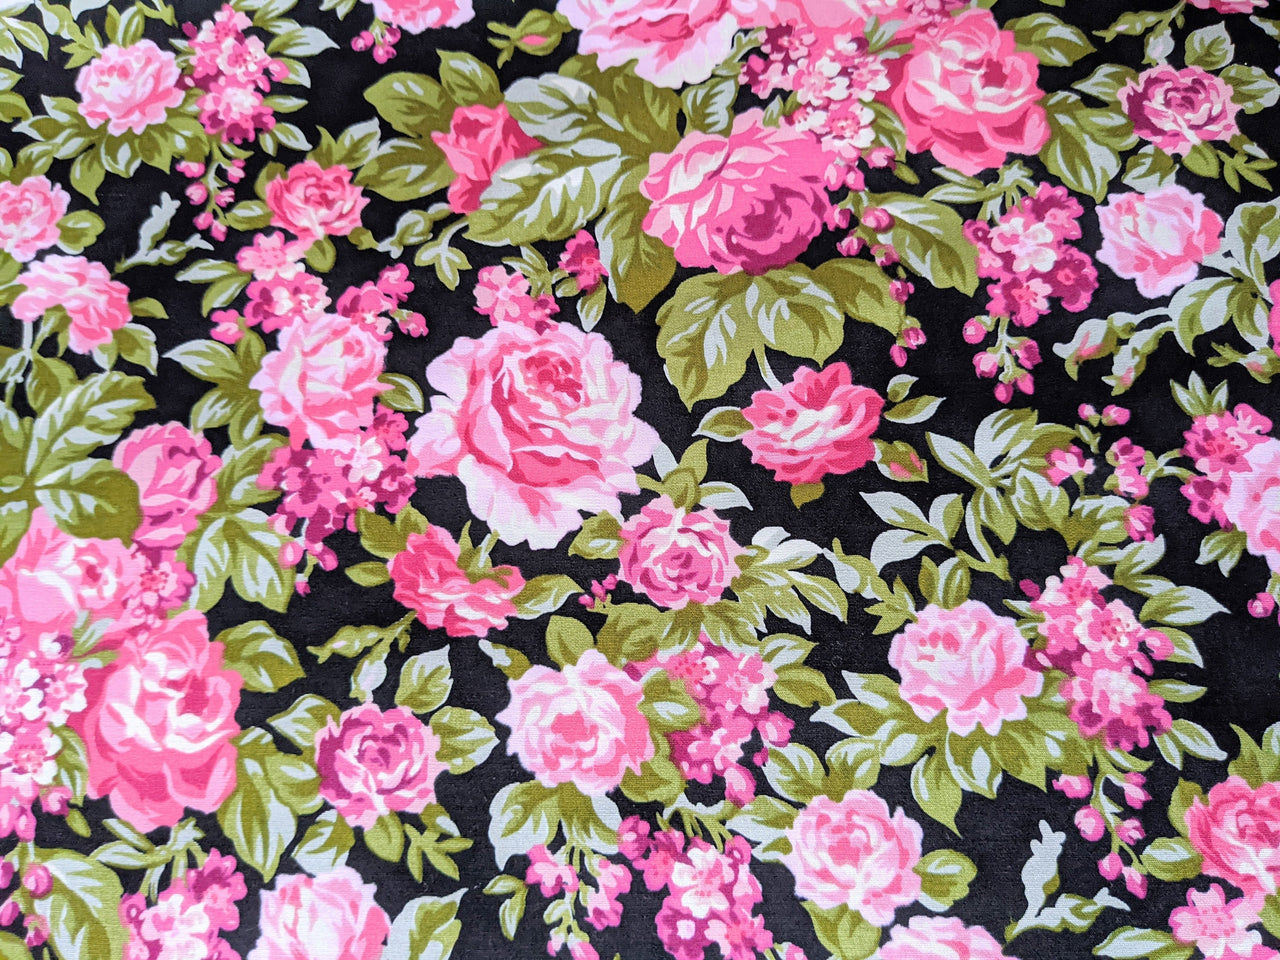 Black And Pink 100 % Cotton Rose Floral Fabric, Floral Print Fabric, Roses Flower Fabric